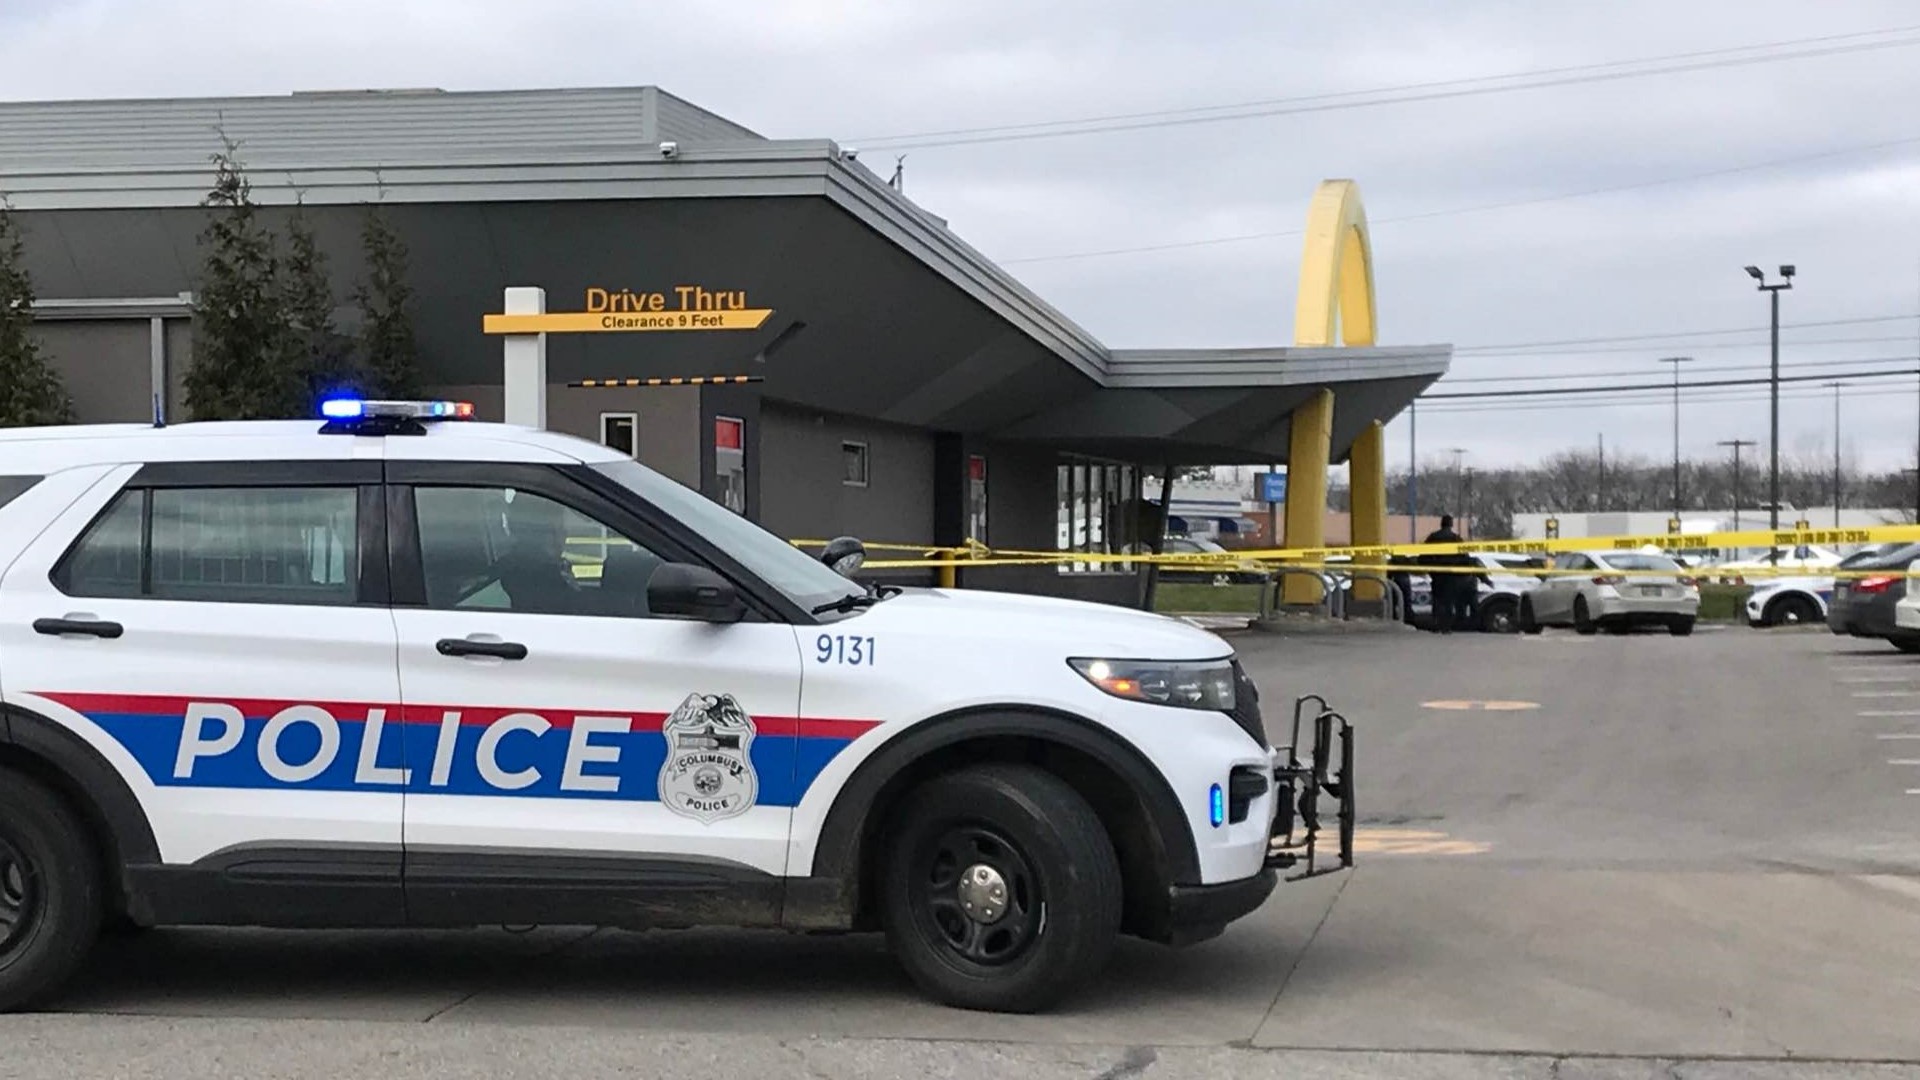 The city of Columbus and community groups are responding to violence following a murder at a local McDonald’s restaurant.